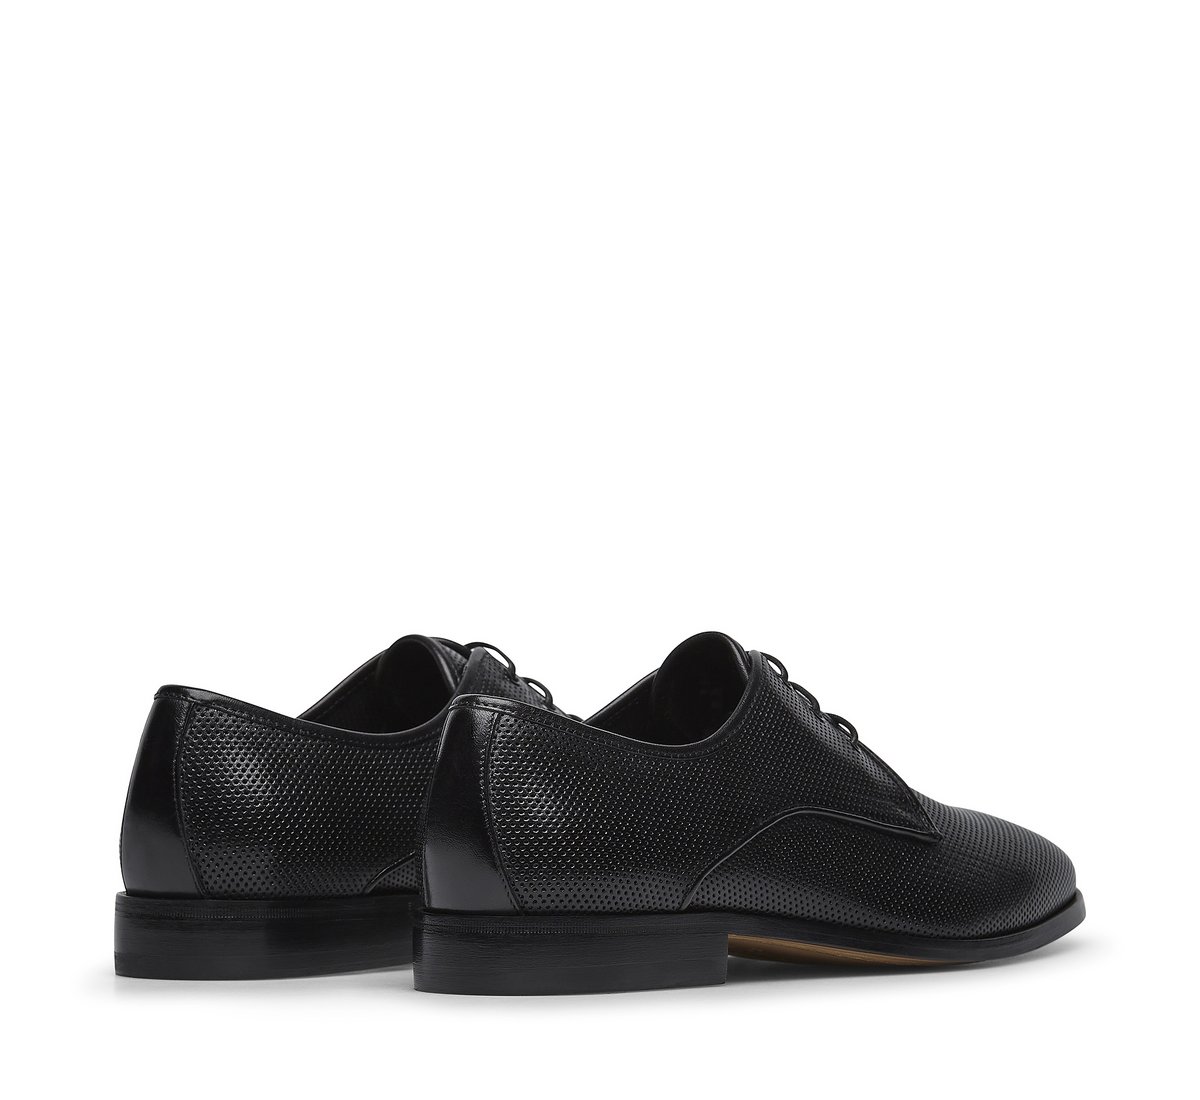 Perforated calfskin derby shoes